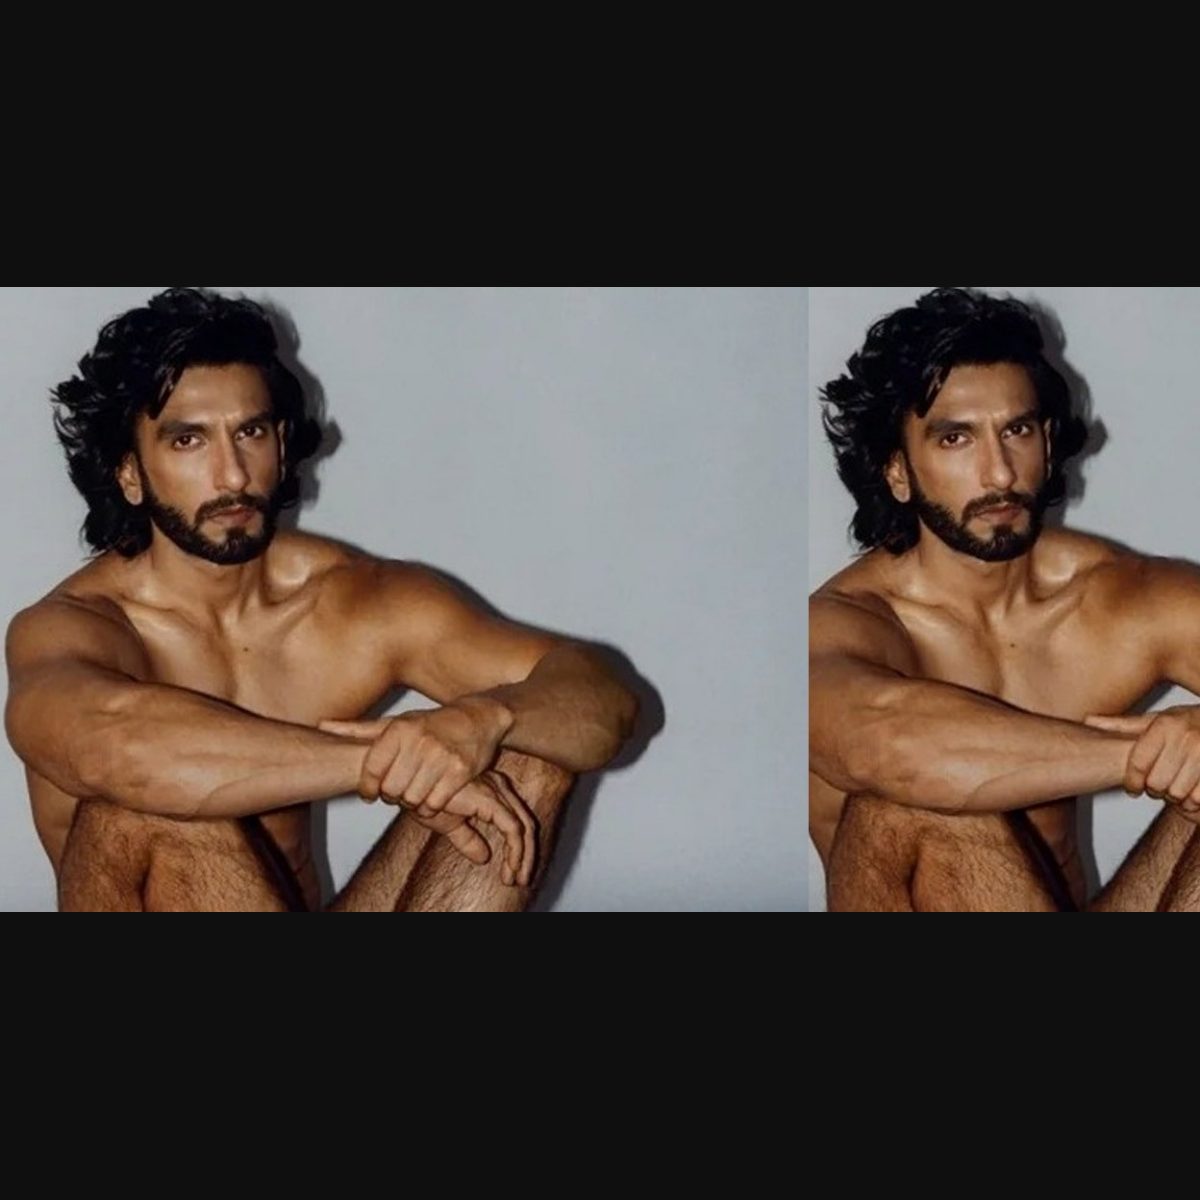 Ranveer Singh bares it all for magazine photoshoot, pics go viral |  Entertainment News | Onmanorama